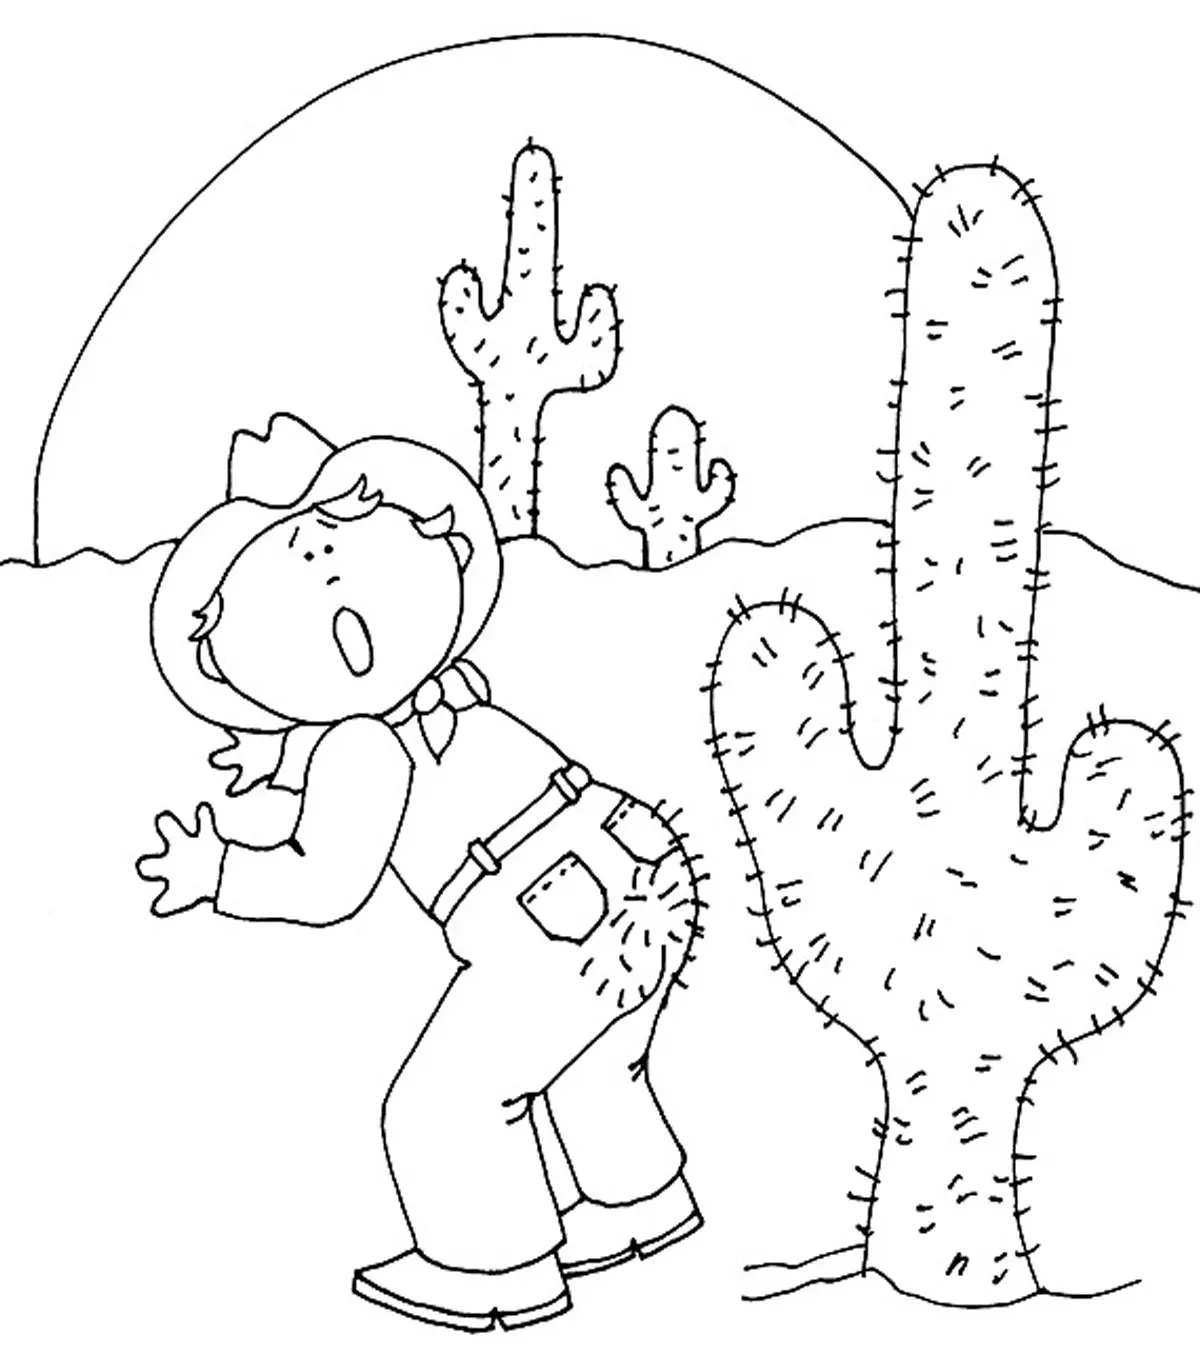 Top 10 Cactus Coloring Pages For Toddlers